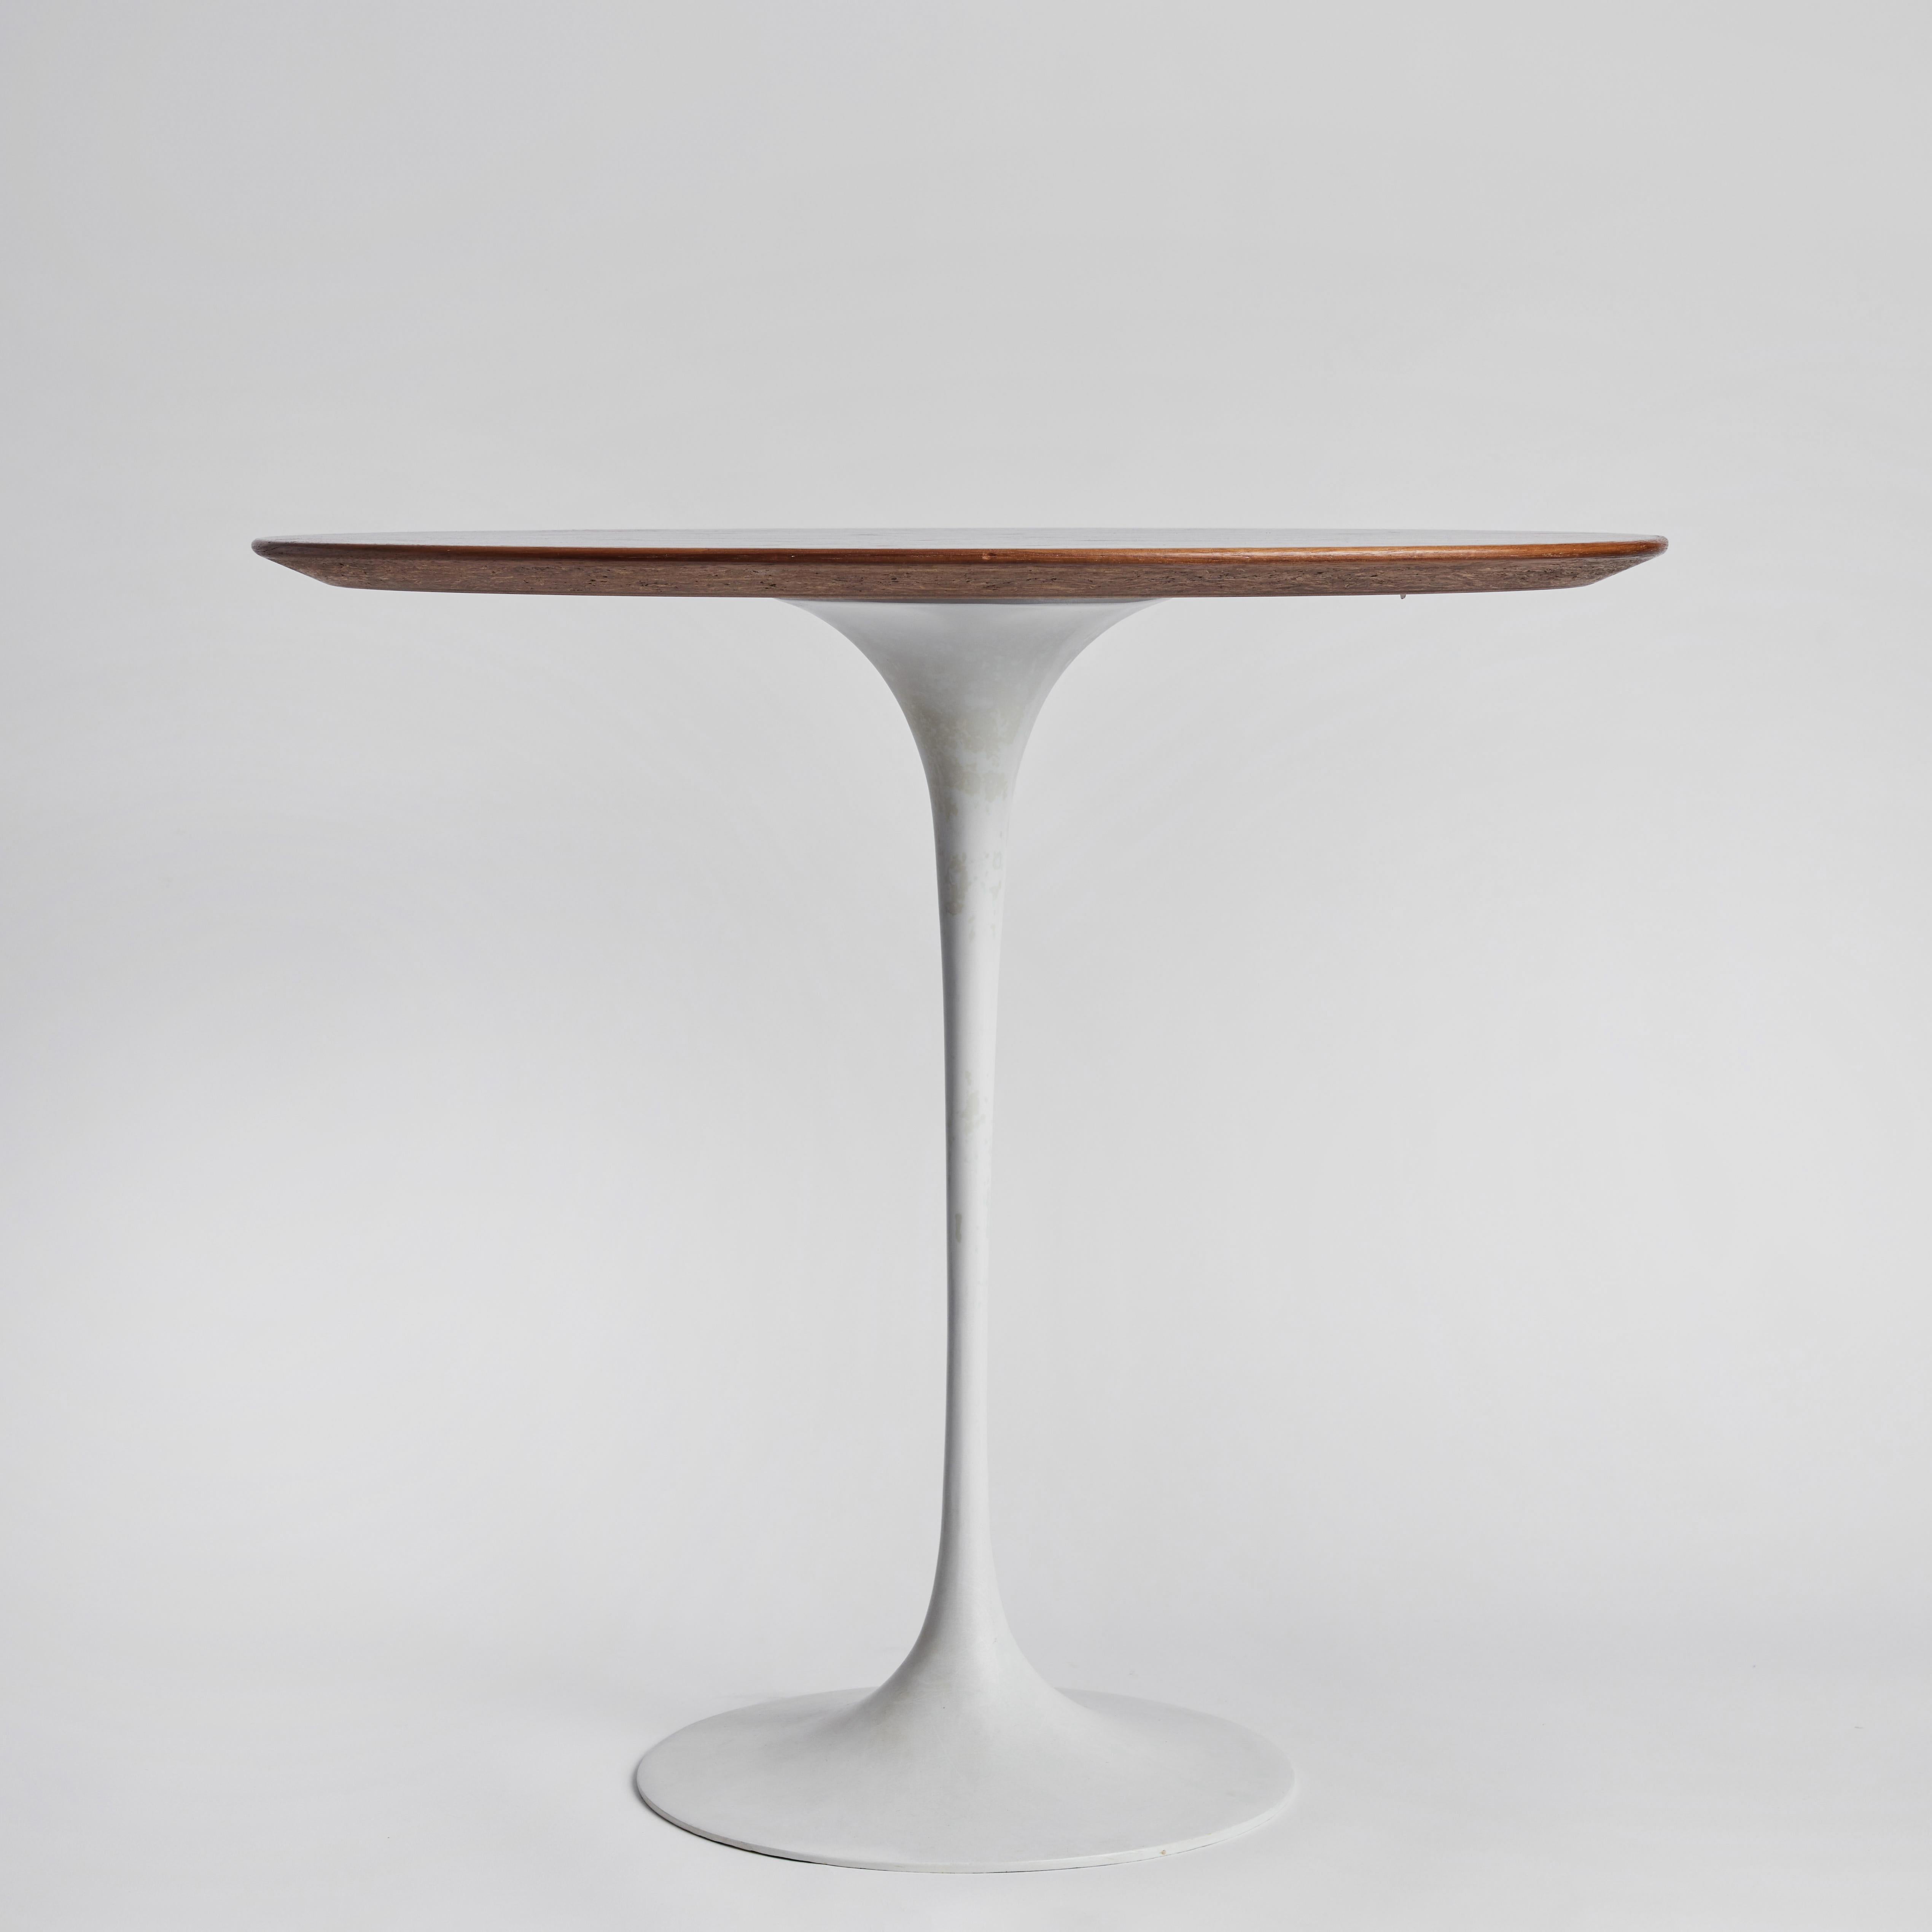 Rare 1960s Saarinen Oval Walnut Table with Early Knoll Label In Good Condition For Sale In Glendale, CA